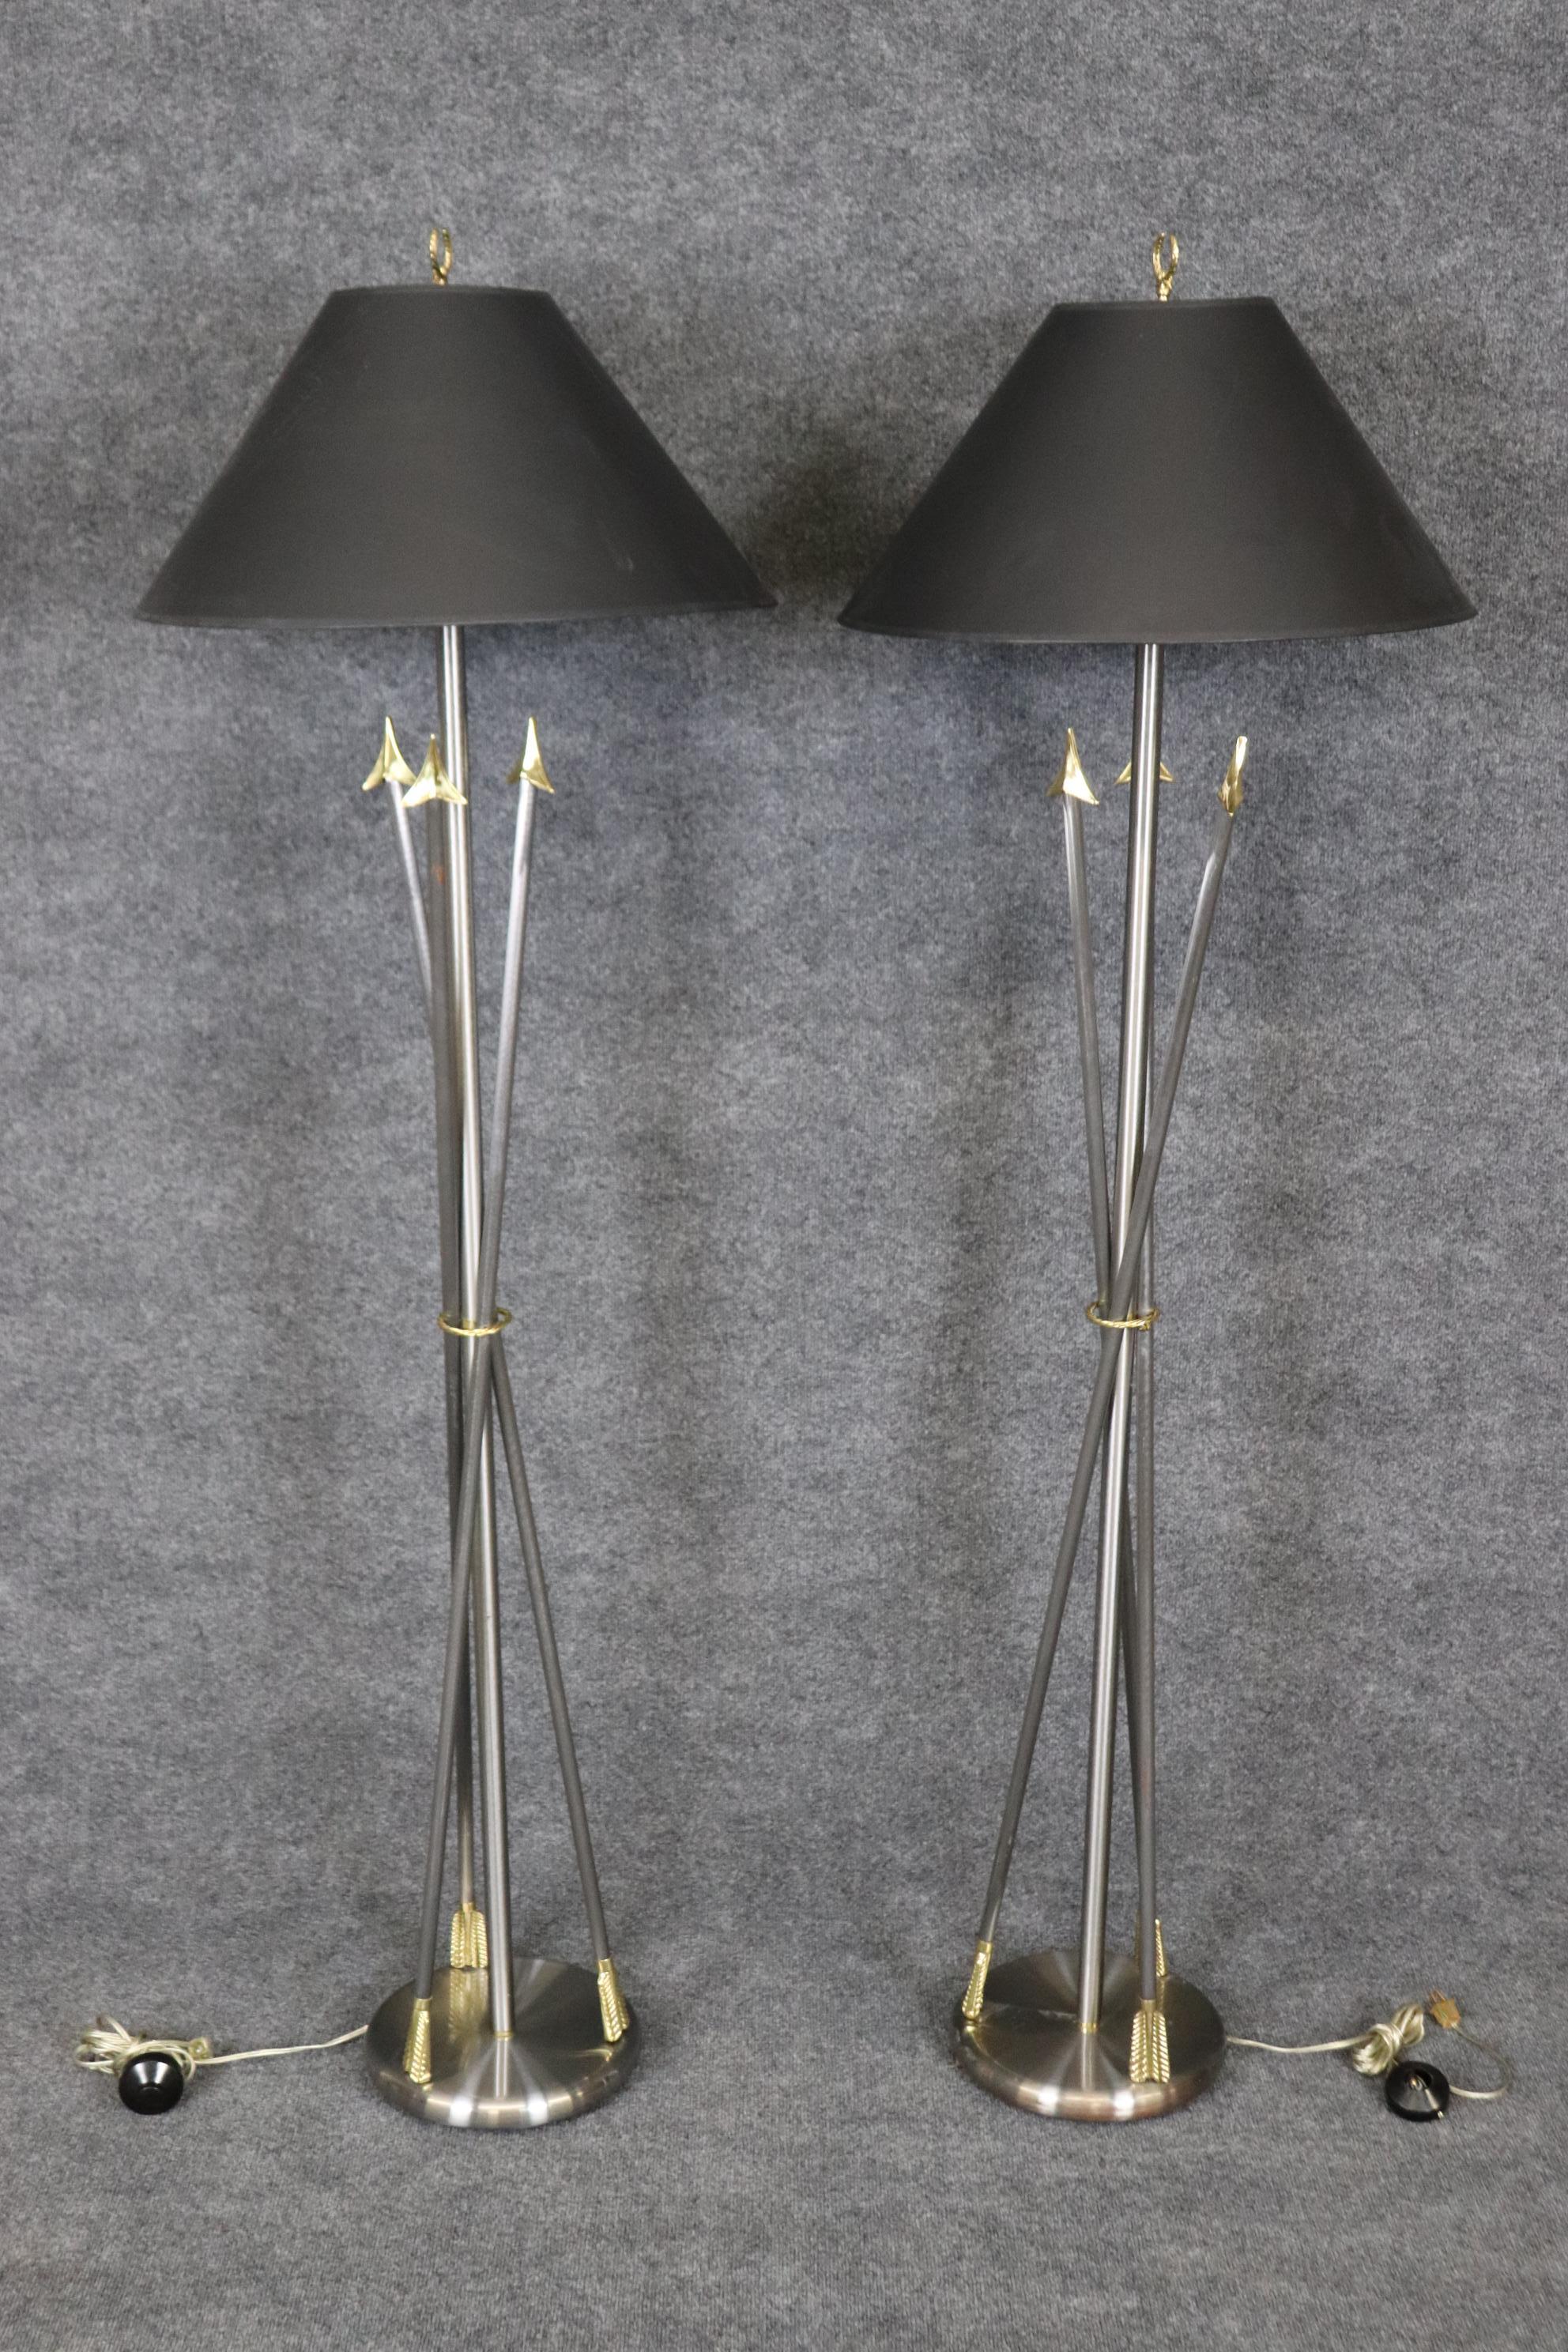 Pair of Maison Jansen Style Brass and Steel Floor Lamps  In Good Condition For Sale In Swedesboro, NJ